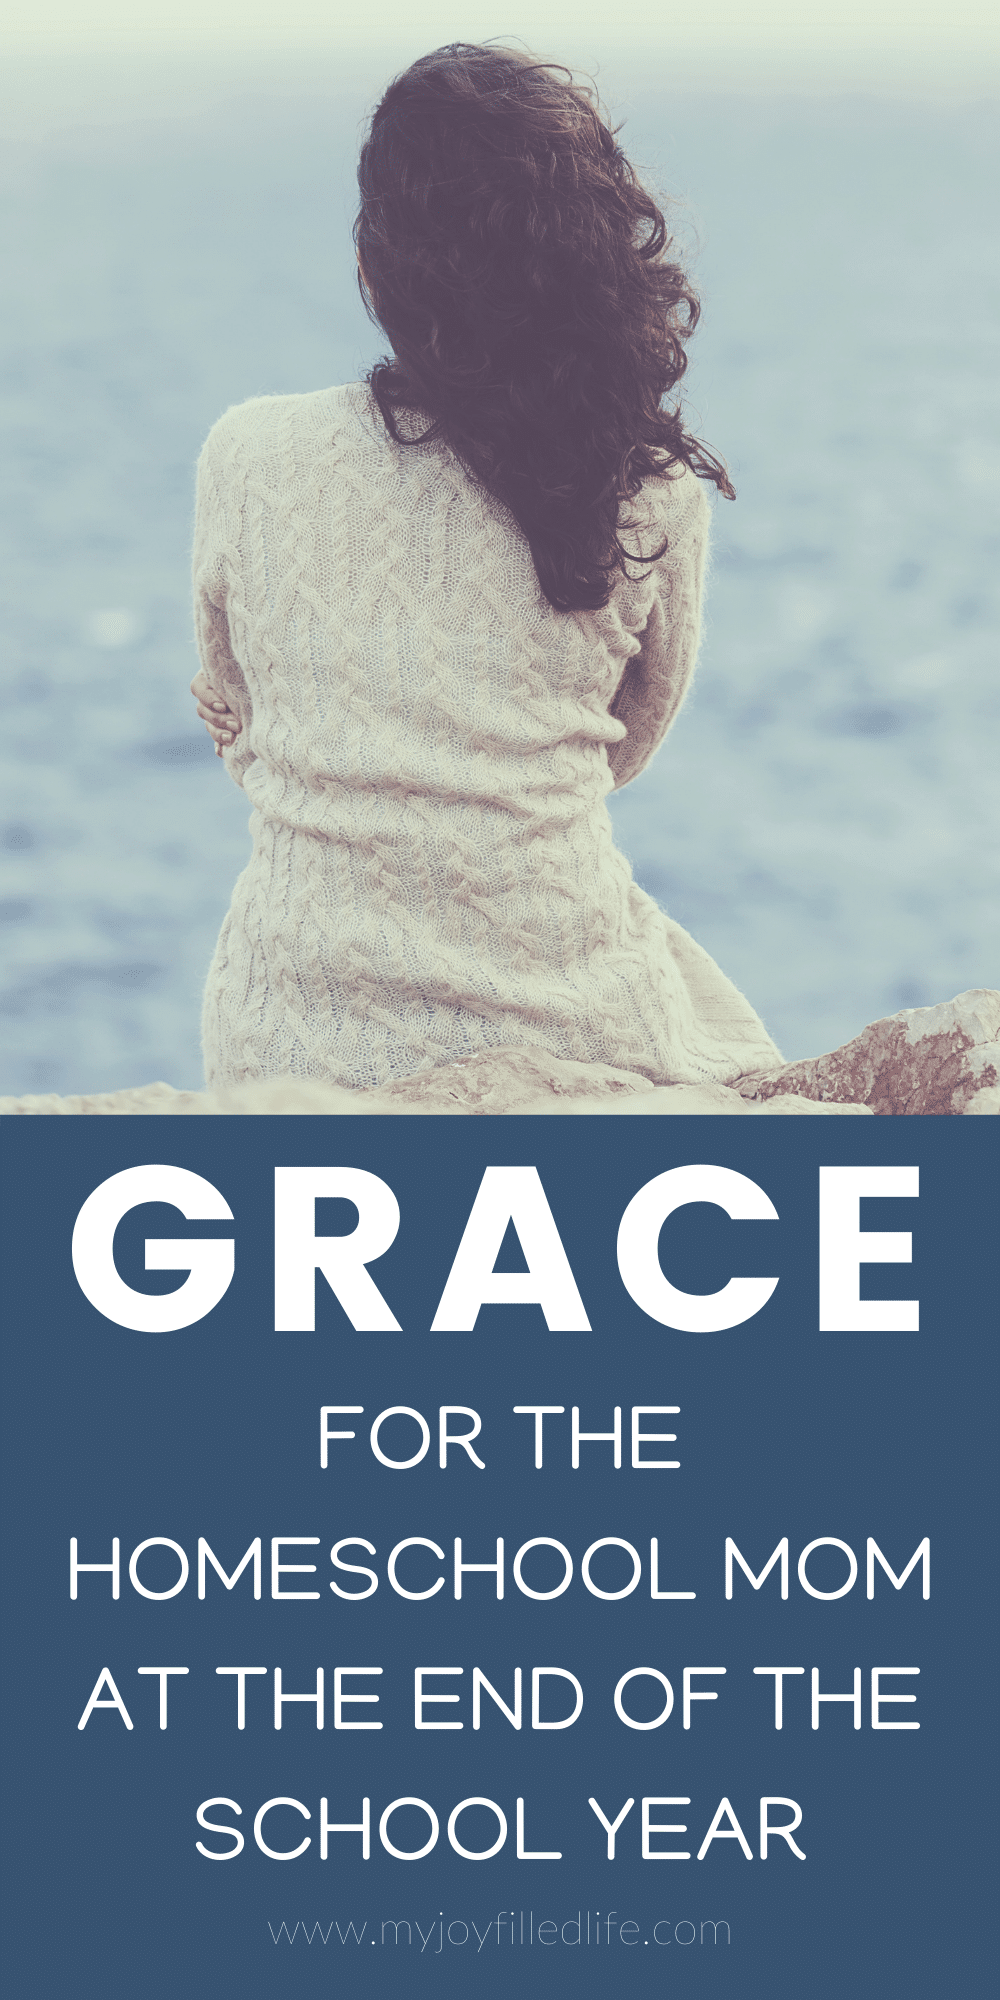 Grace for the Homeschool Mom at End of Year